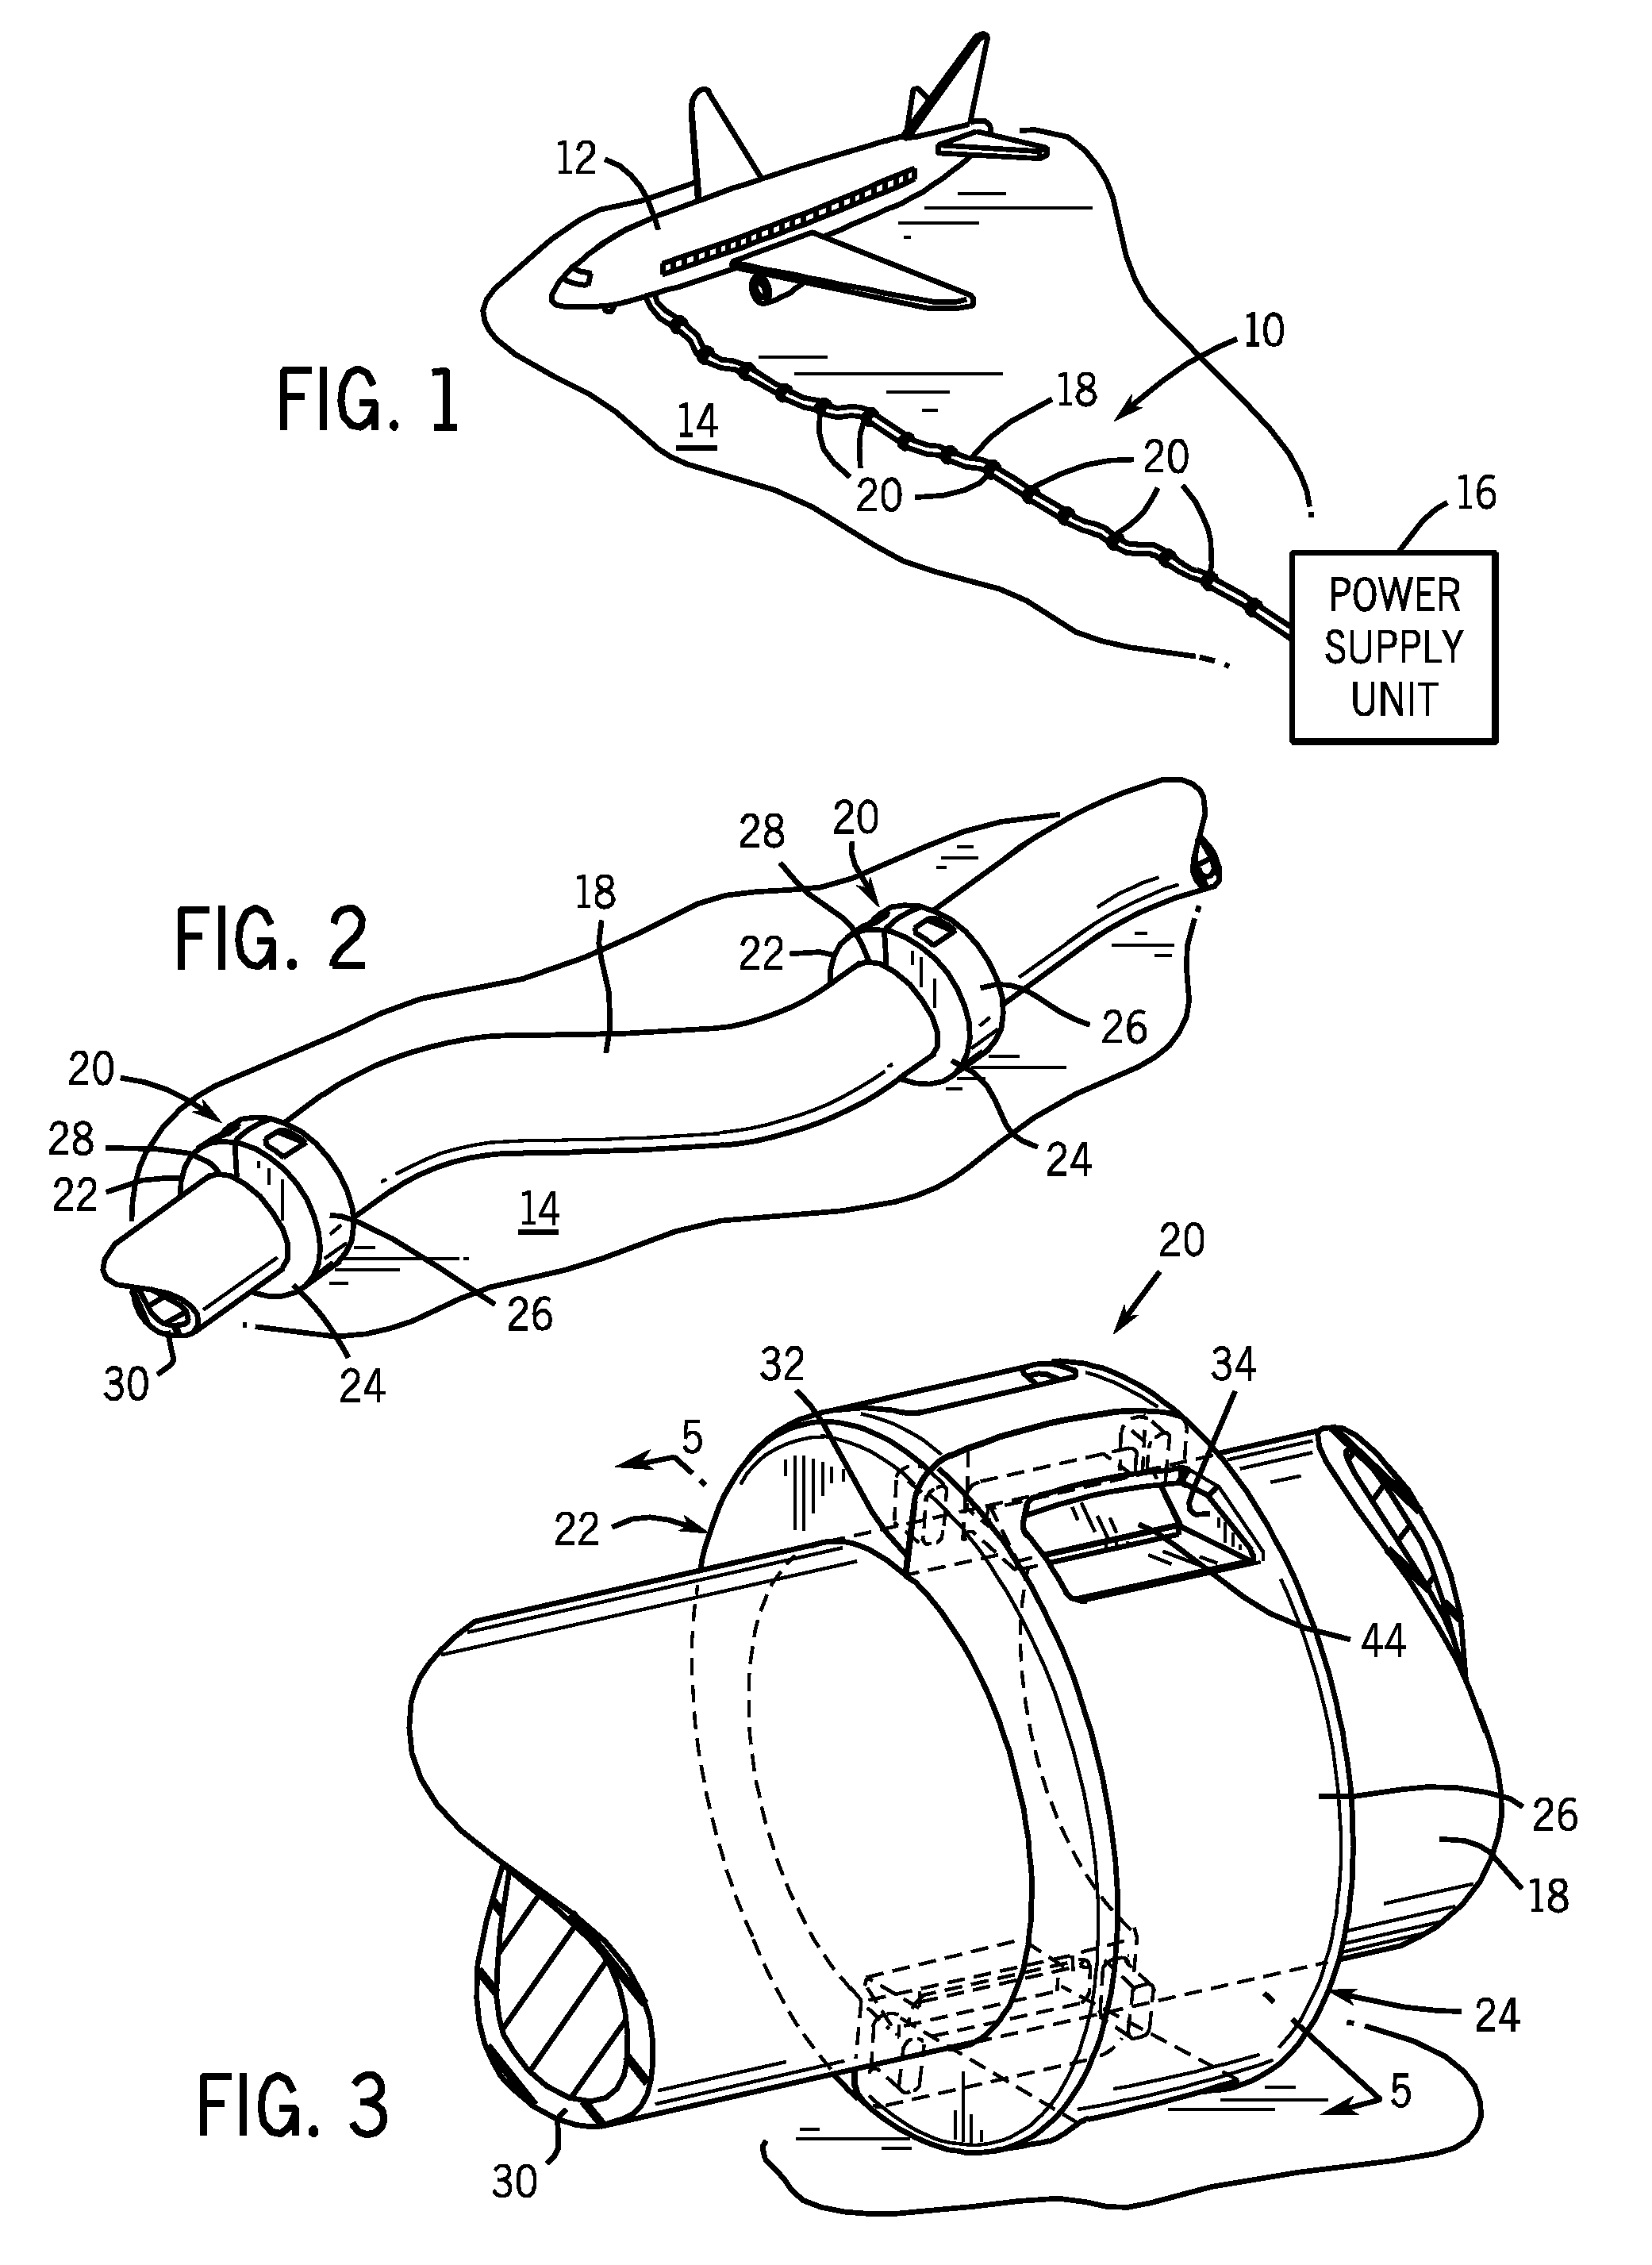 Parked aircraft power cable protection system and method